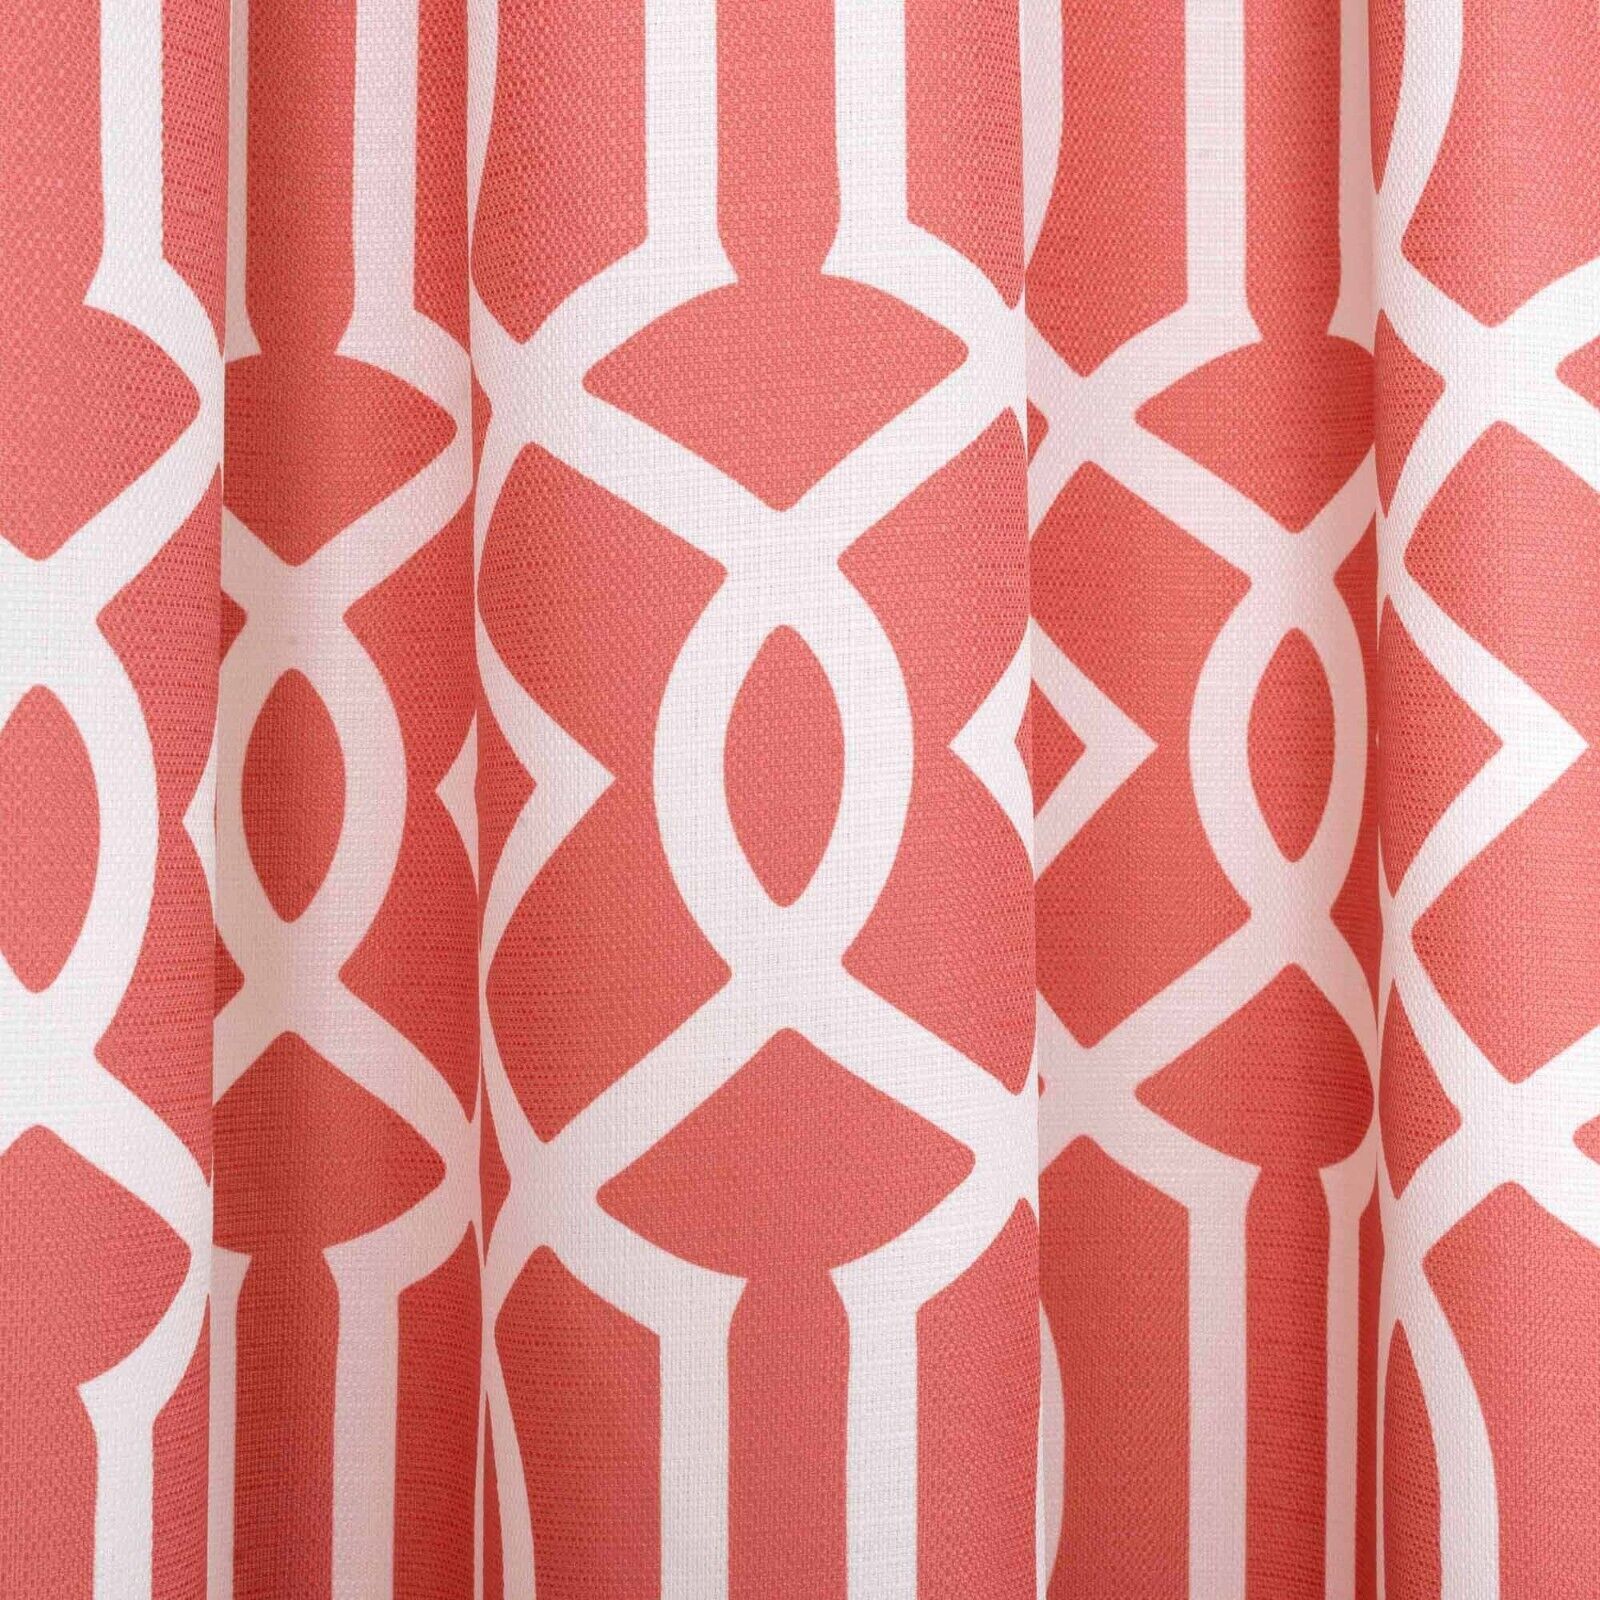 Better Homes and Gardens Ironwork Window Single Curtain Coral Panel 52'' x 95'' - $14.99